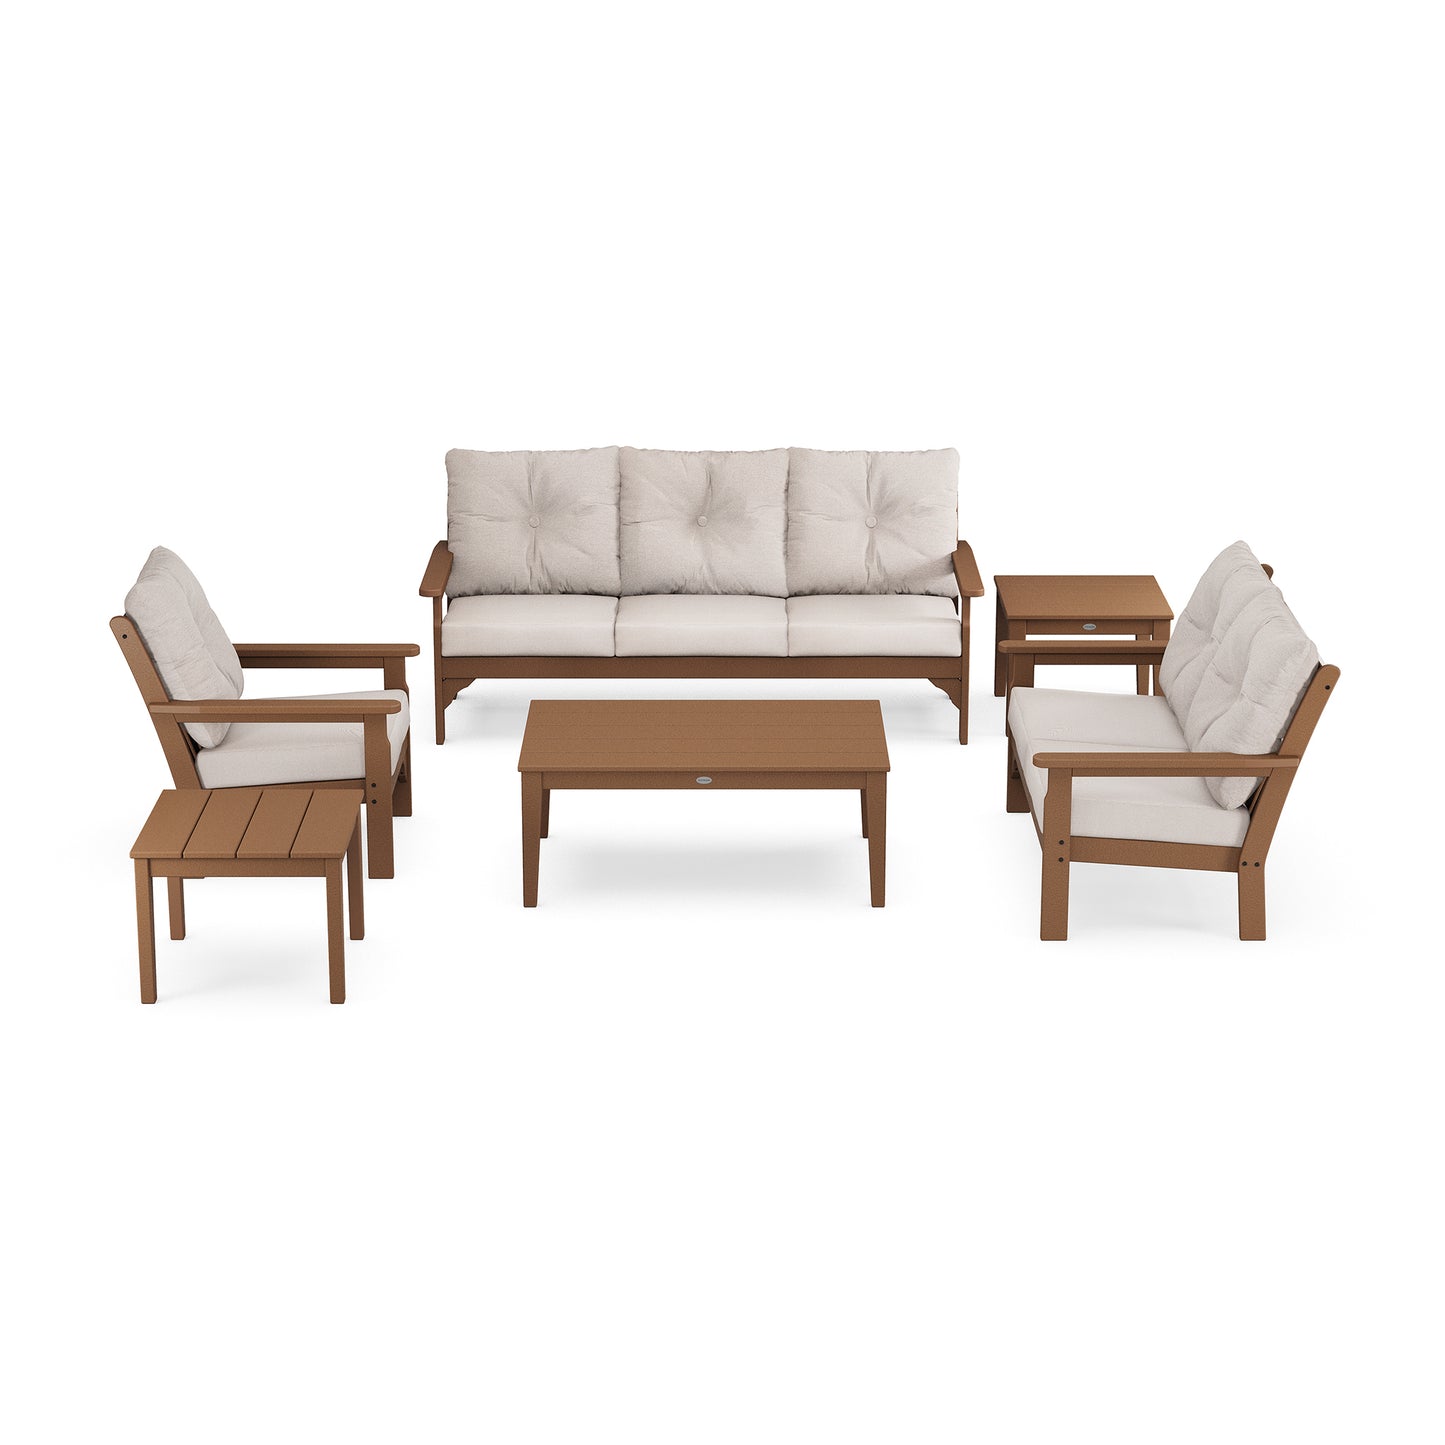 A set of outdoor POLYWOOD luxury furniture featuring a sofa, two chairs with cushions, and a coffee table, all in matching brown synthetic material, against a white background.